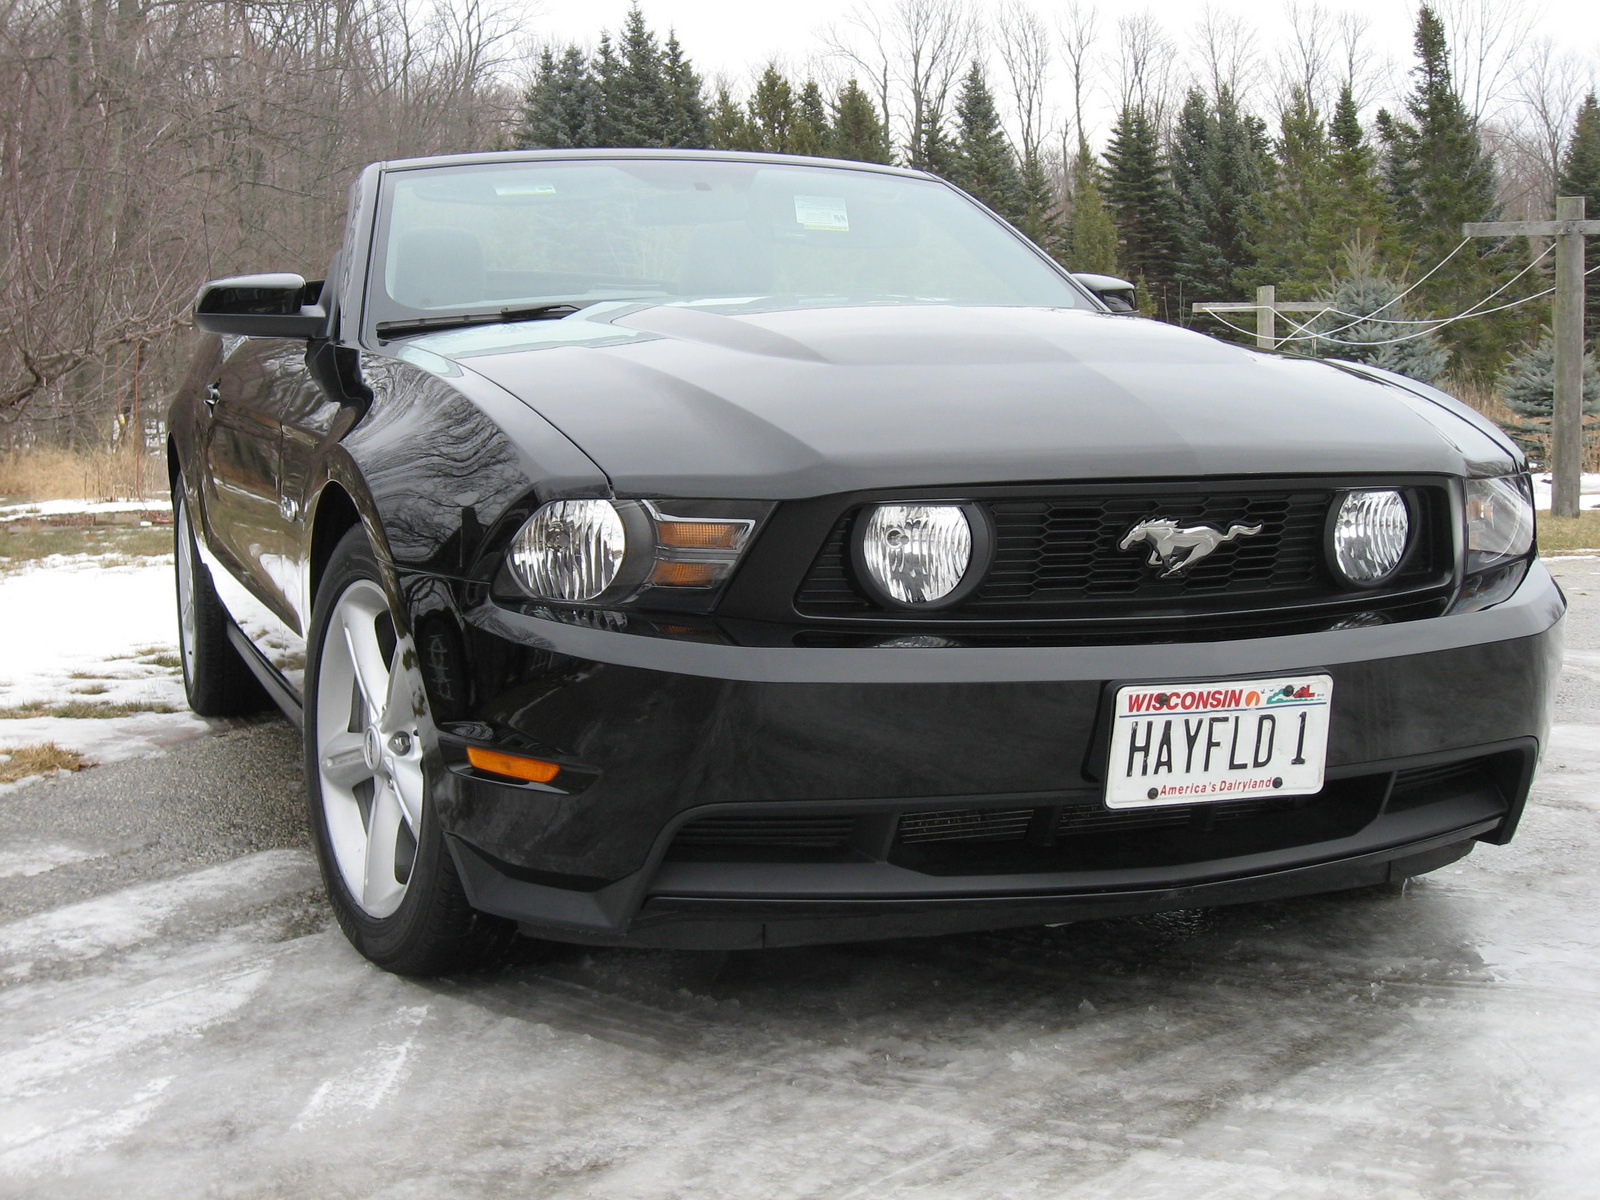 2005 Ford mustang gt convertible owners manual